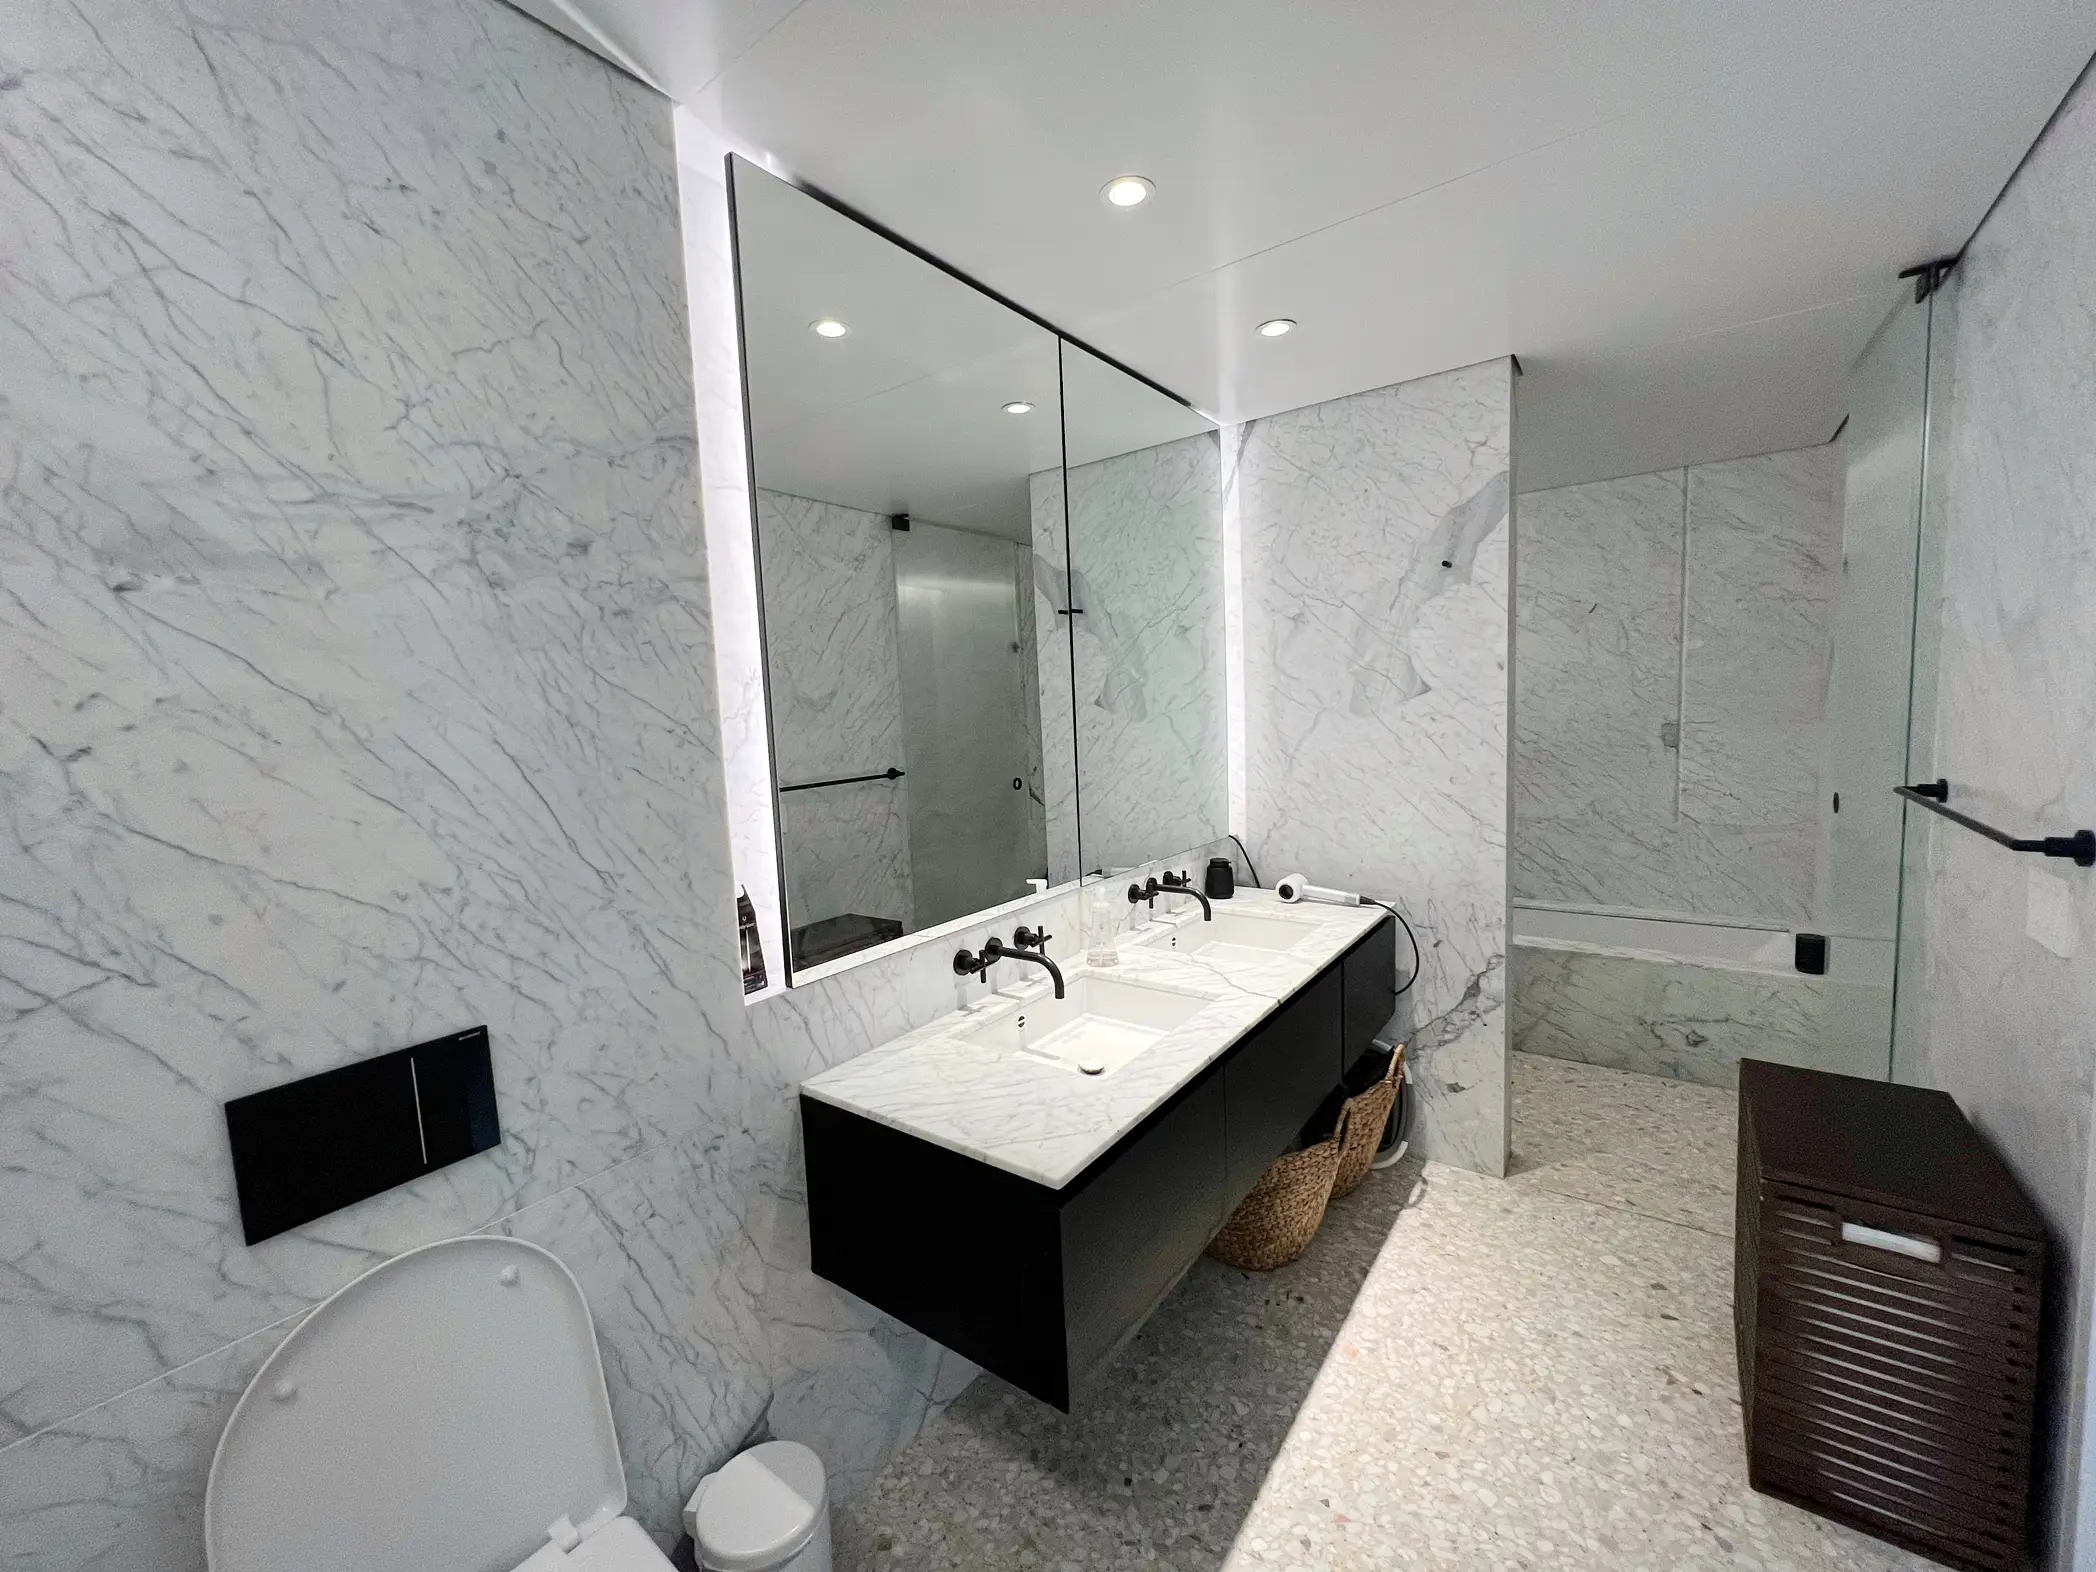  A bathroom with a sink, toilet, and mirror. The sink is white and sits under a mirror. The toilet is located to the left of the sink. The bathroom has a tile floor.